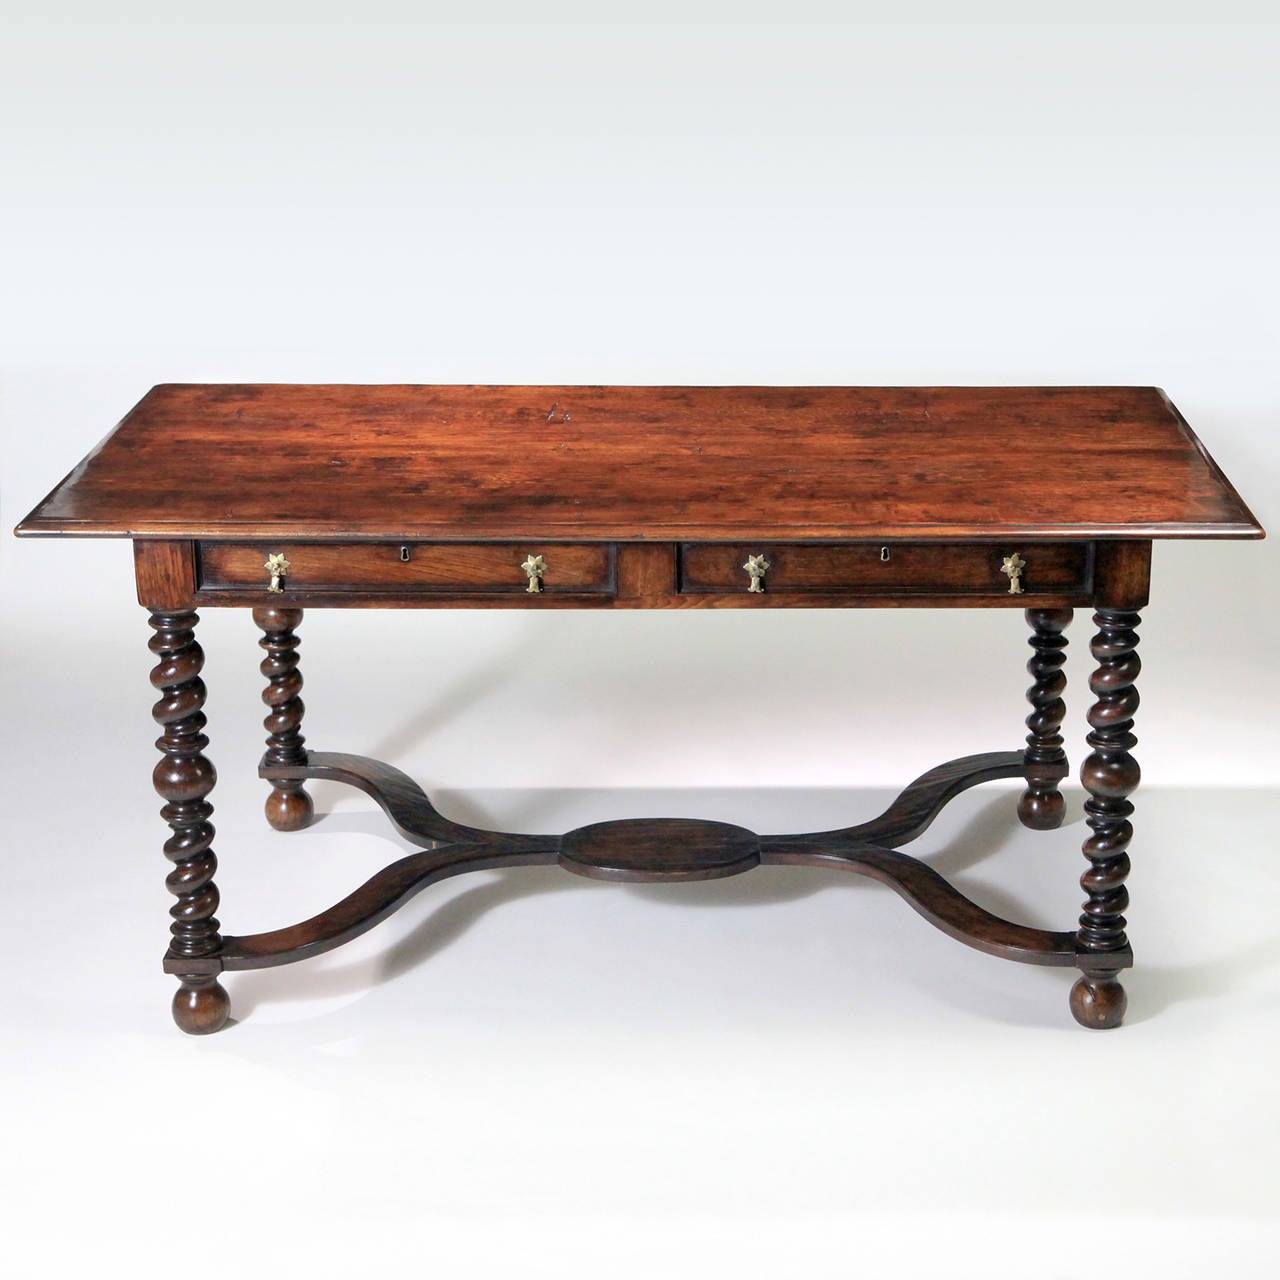 Traditional polished English oak library table with long cross stretcher and barley twist legs. The table features two long drawers with lock and key on the front side of the table and two matching faux drawers on the reverse side. This classic